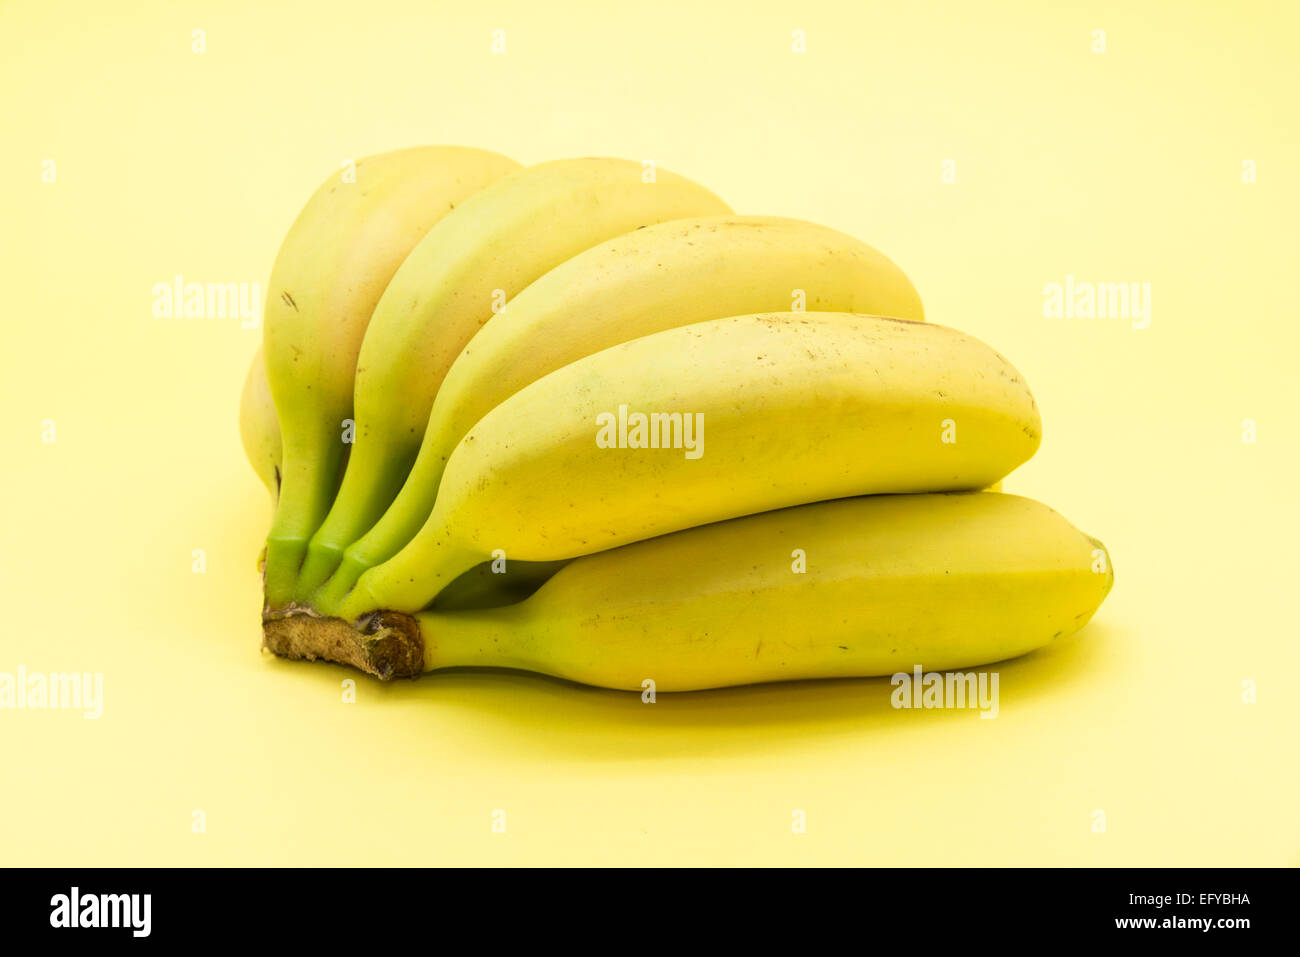 bananas on a yellow background Stock Photo